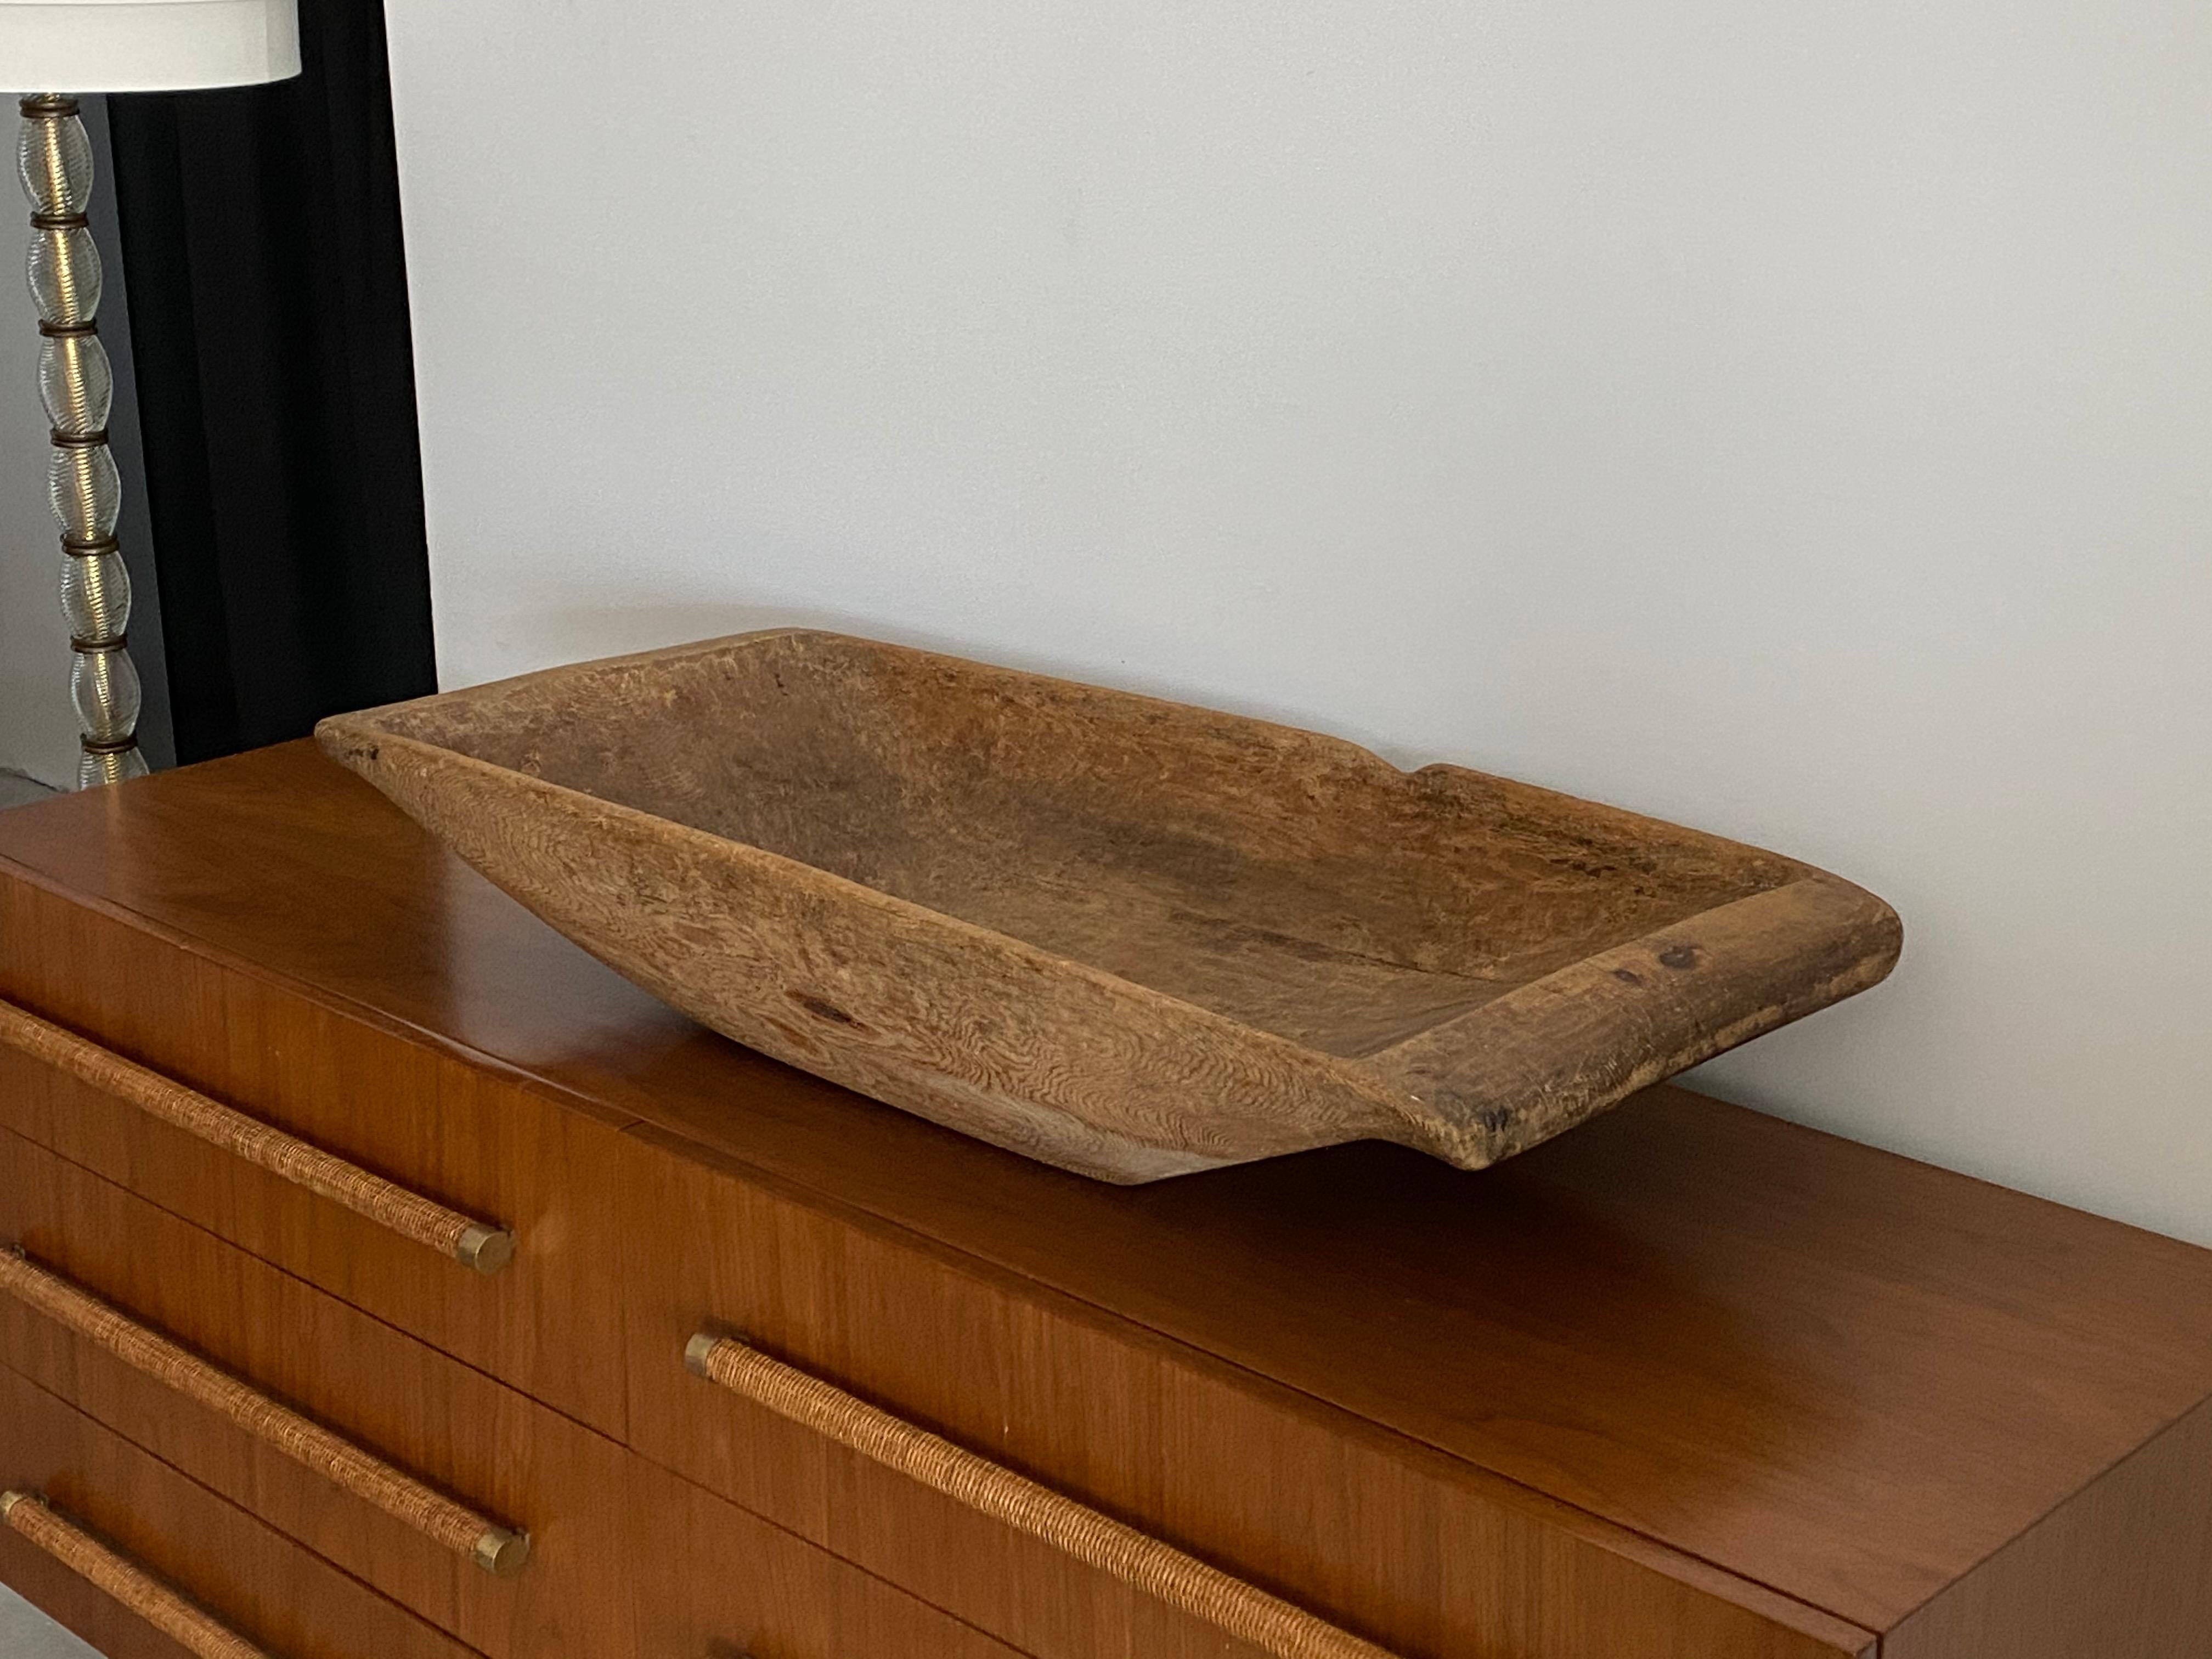 A large farmers handcrafted form or tray or serving bowl or centerpiece. In solid pine wood. A highly functional object with a sculptural appearance.

 